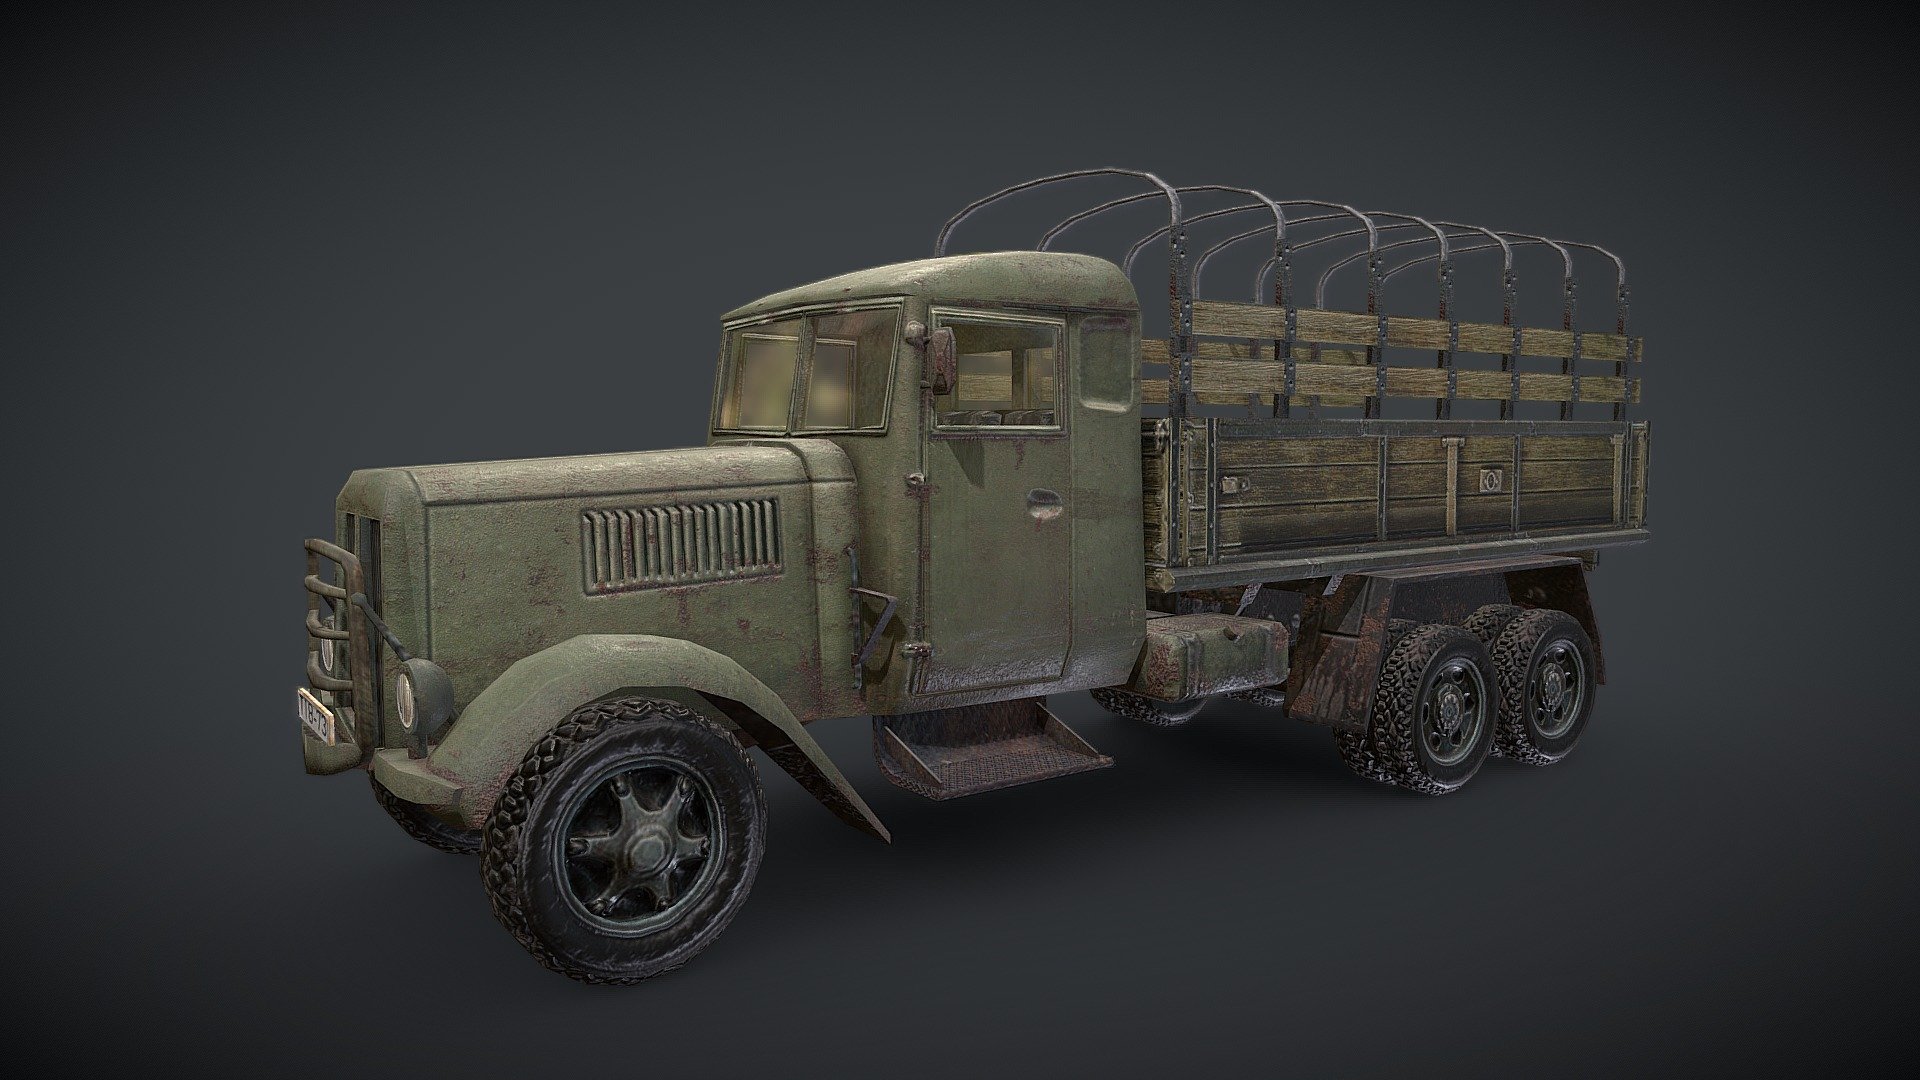 Army truck low poly 3D model for games or real-time applications.
2K PBR textures - Army Truck - Buy Royalty Free 3D model by Realtime (@gipapatank) 3d model